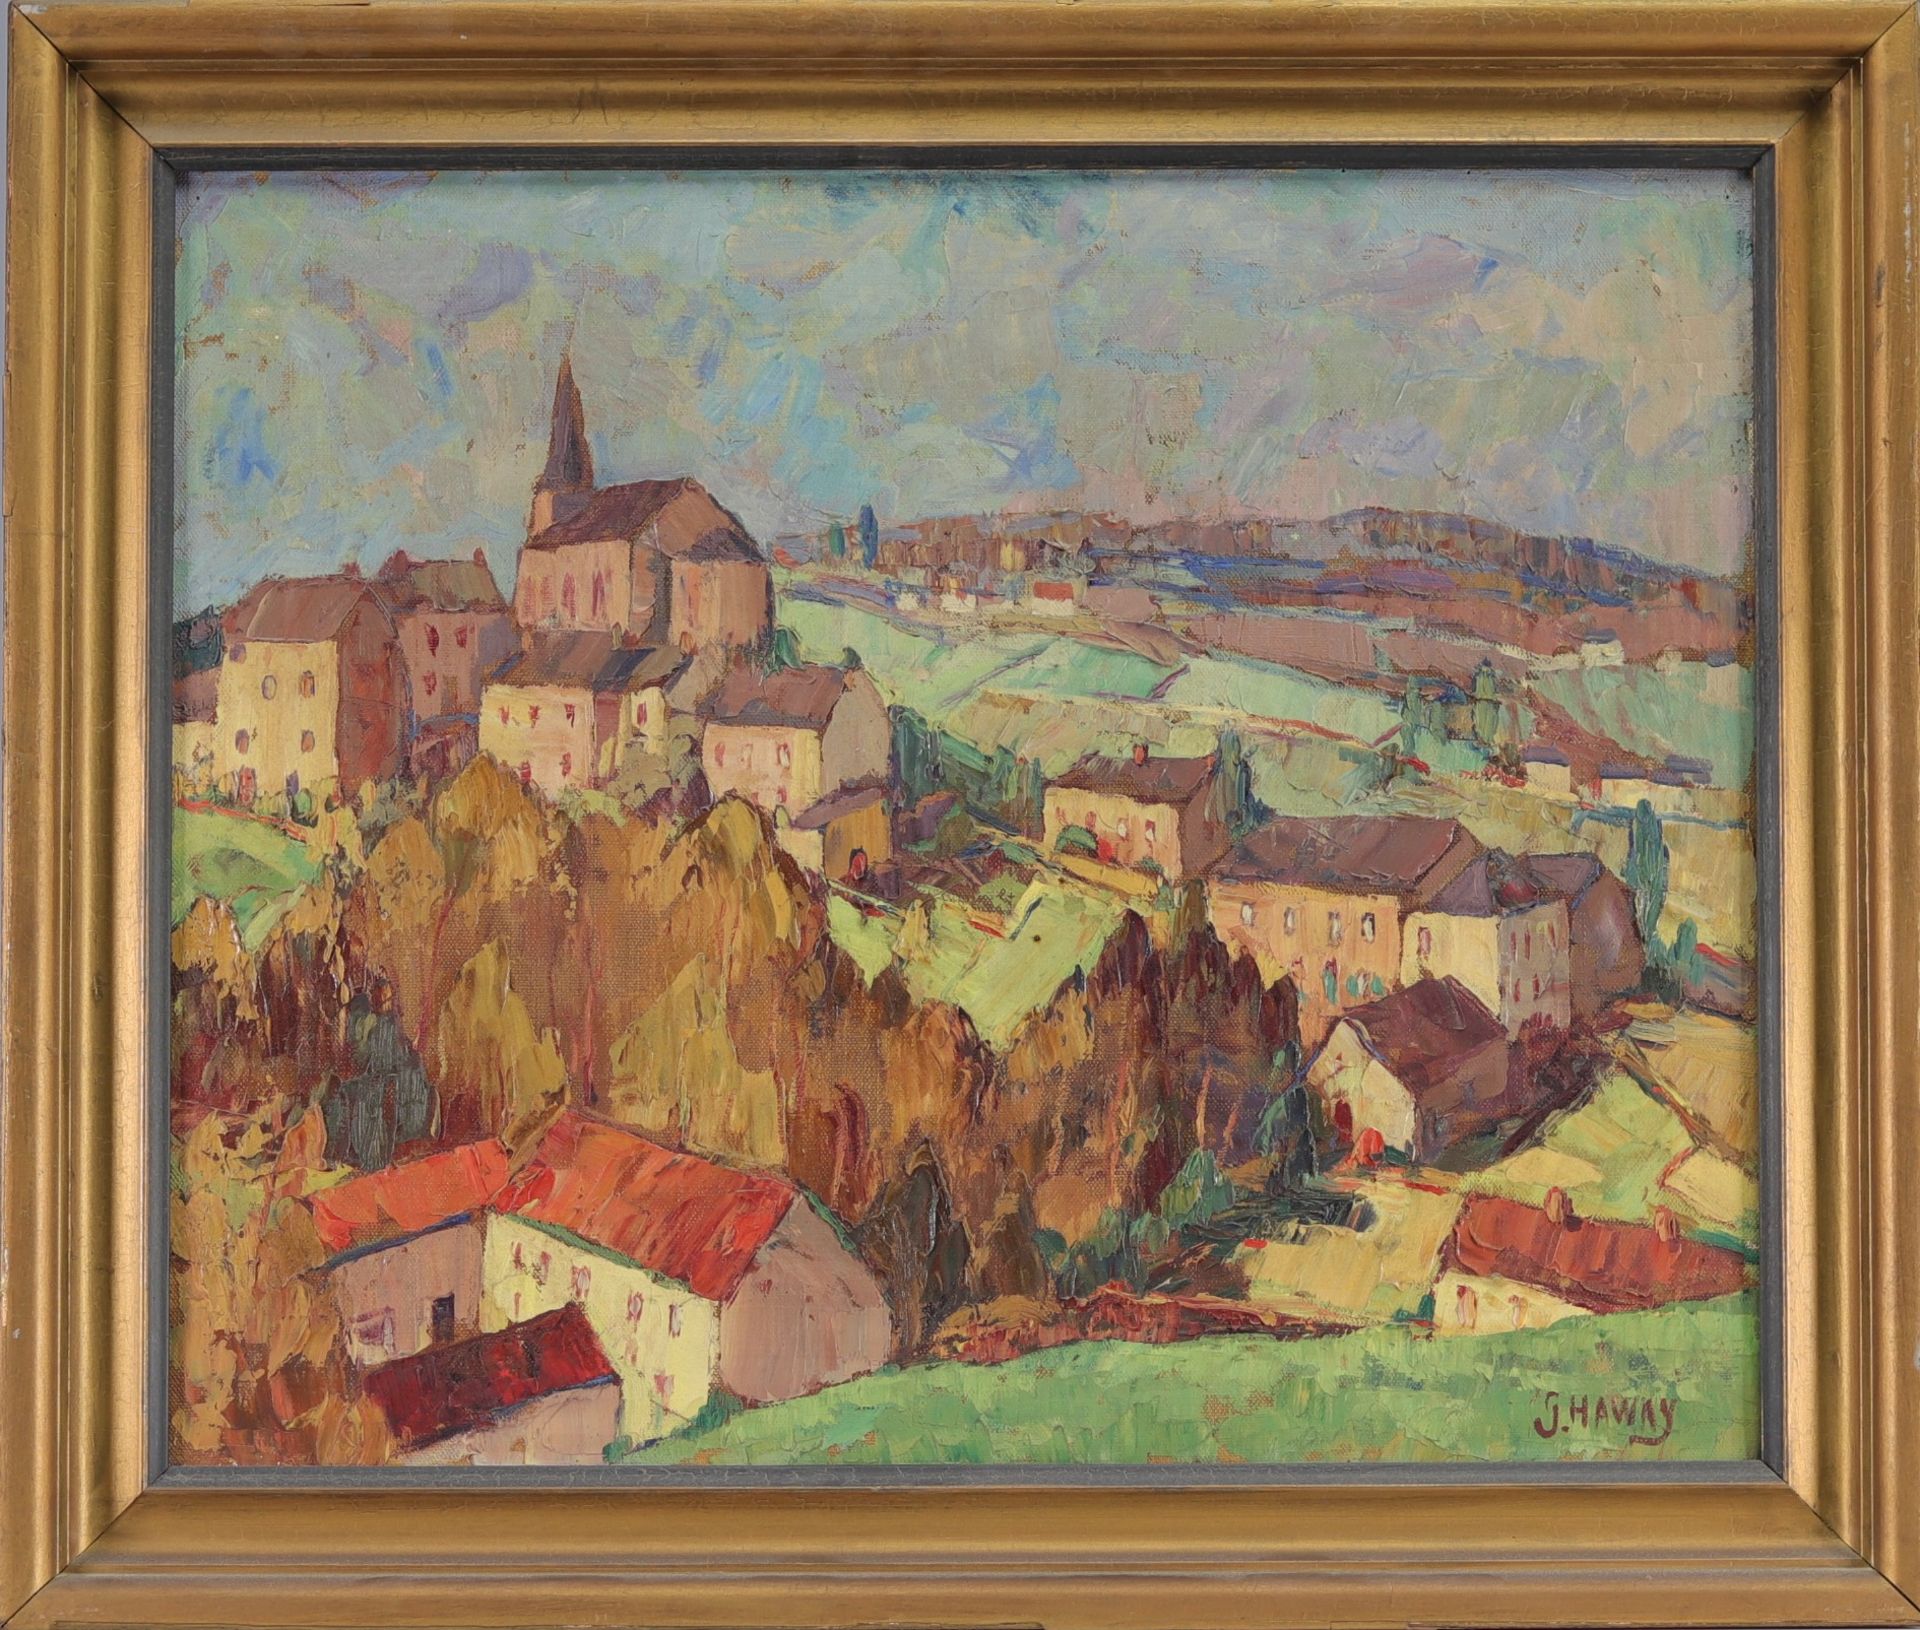 Georges HAWAY (1895-1945) "View of the village Moha" Oil on canvas. - Image 2 of 4